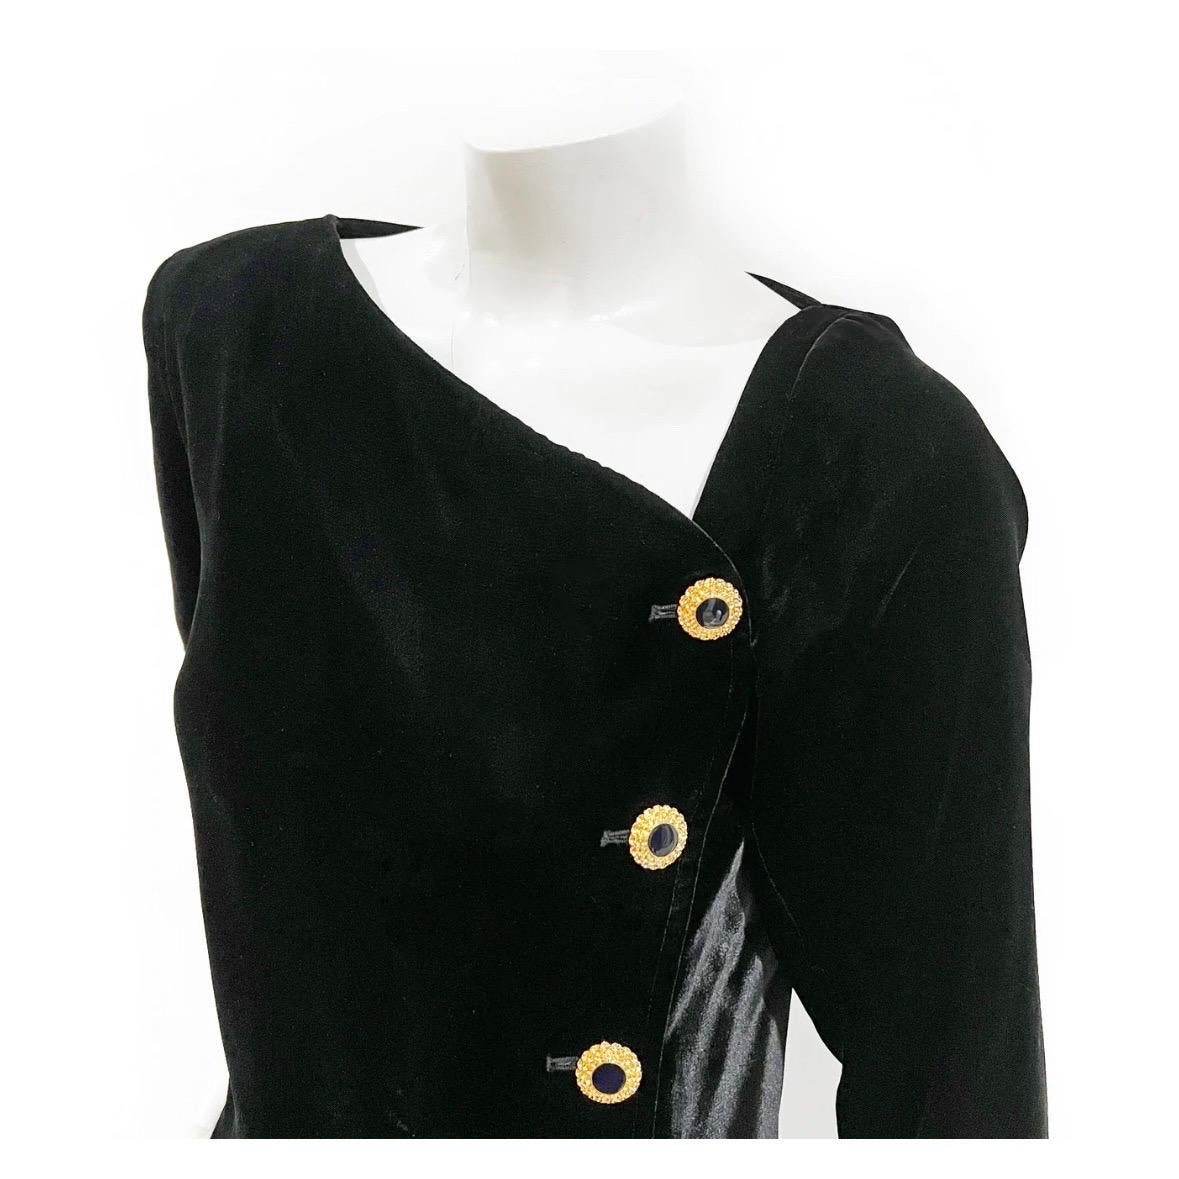 Vintage Asymmetrical Velvet Button Front Dress by Saint Laurent Rive Gauche
1980's
Made in France
Black velvet 
Long sleeves
Asymmetrical neck line 
Single (right) shoulder pad
Decorative (and functioning) gold-metal buttons down front
Corresponding